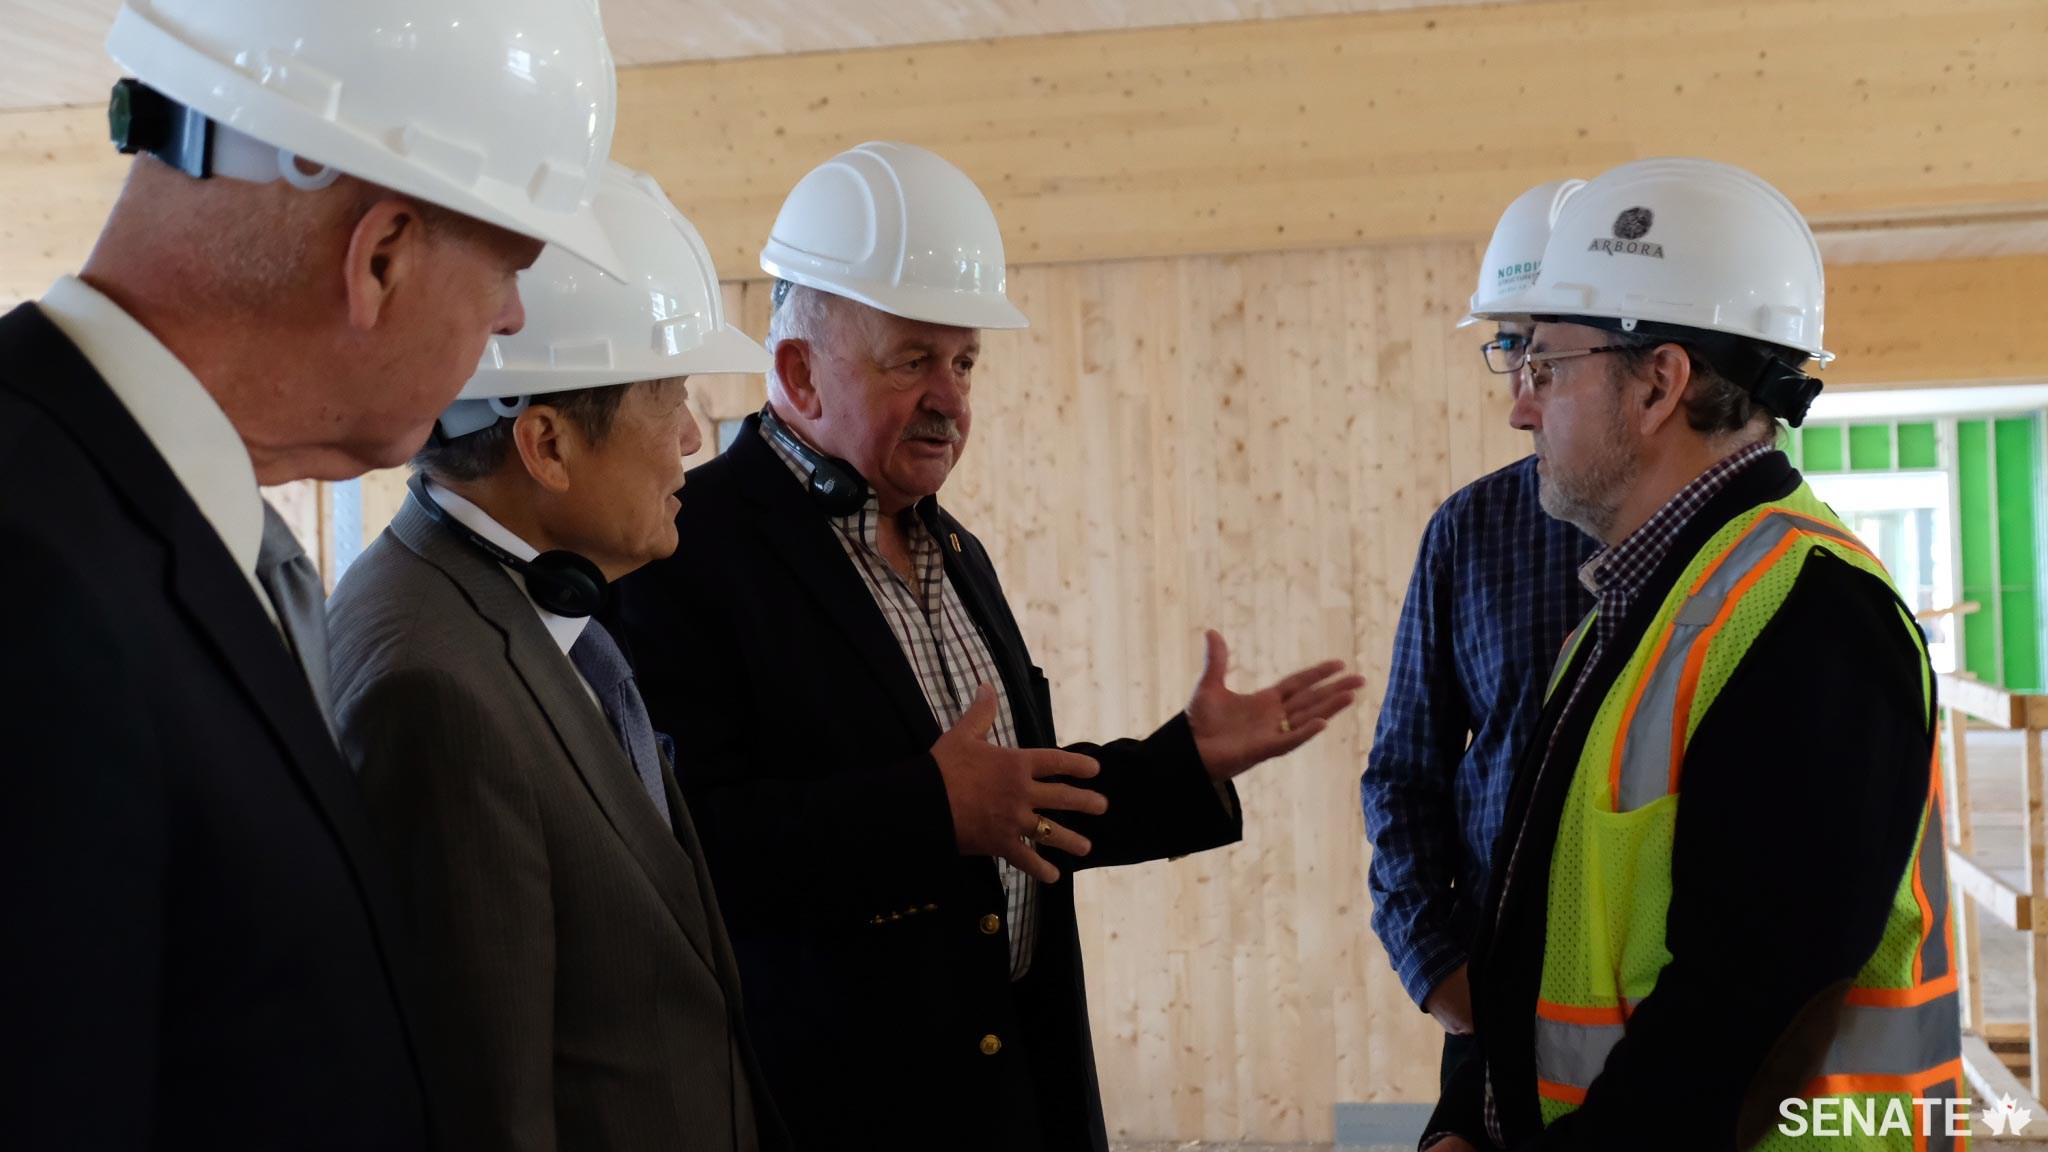 Senators learn at Arbora, a condo construction project in Montreal, that solid wood is the only construction material that is both renewable and recyclable. Wood also possesses the ability to remove carbon from the atmosphere for a long period of time. For example, one cubic metre of wood can take one ton of carbon dioxide from the atmosphere.